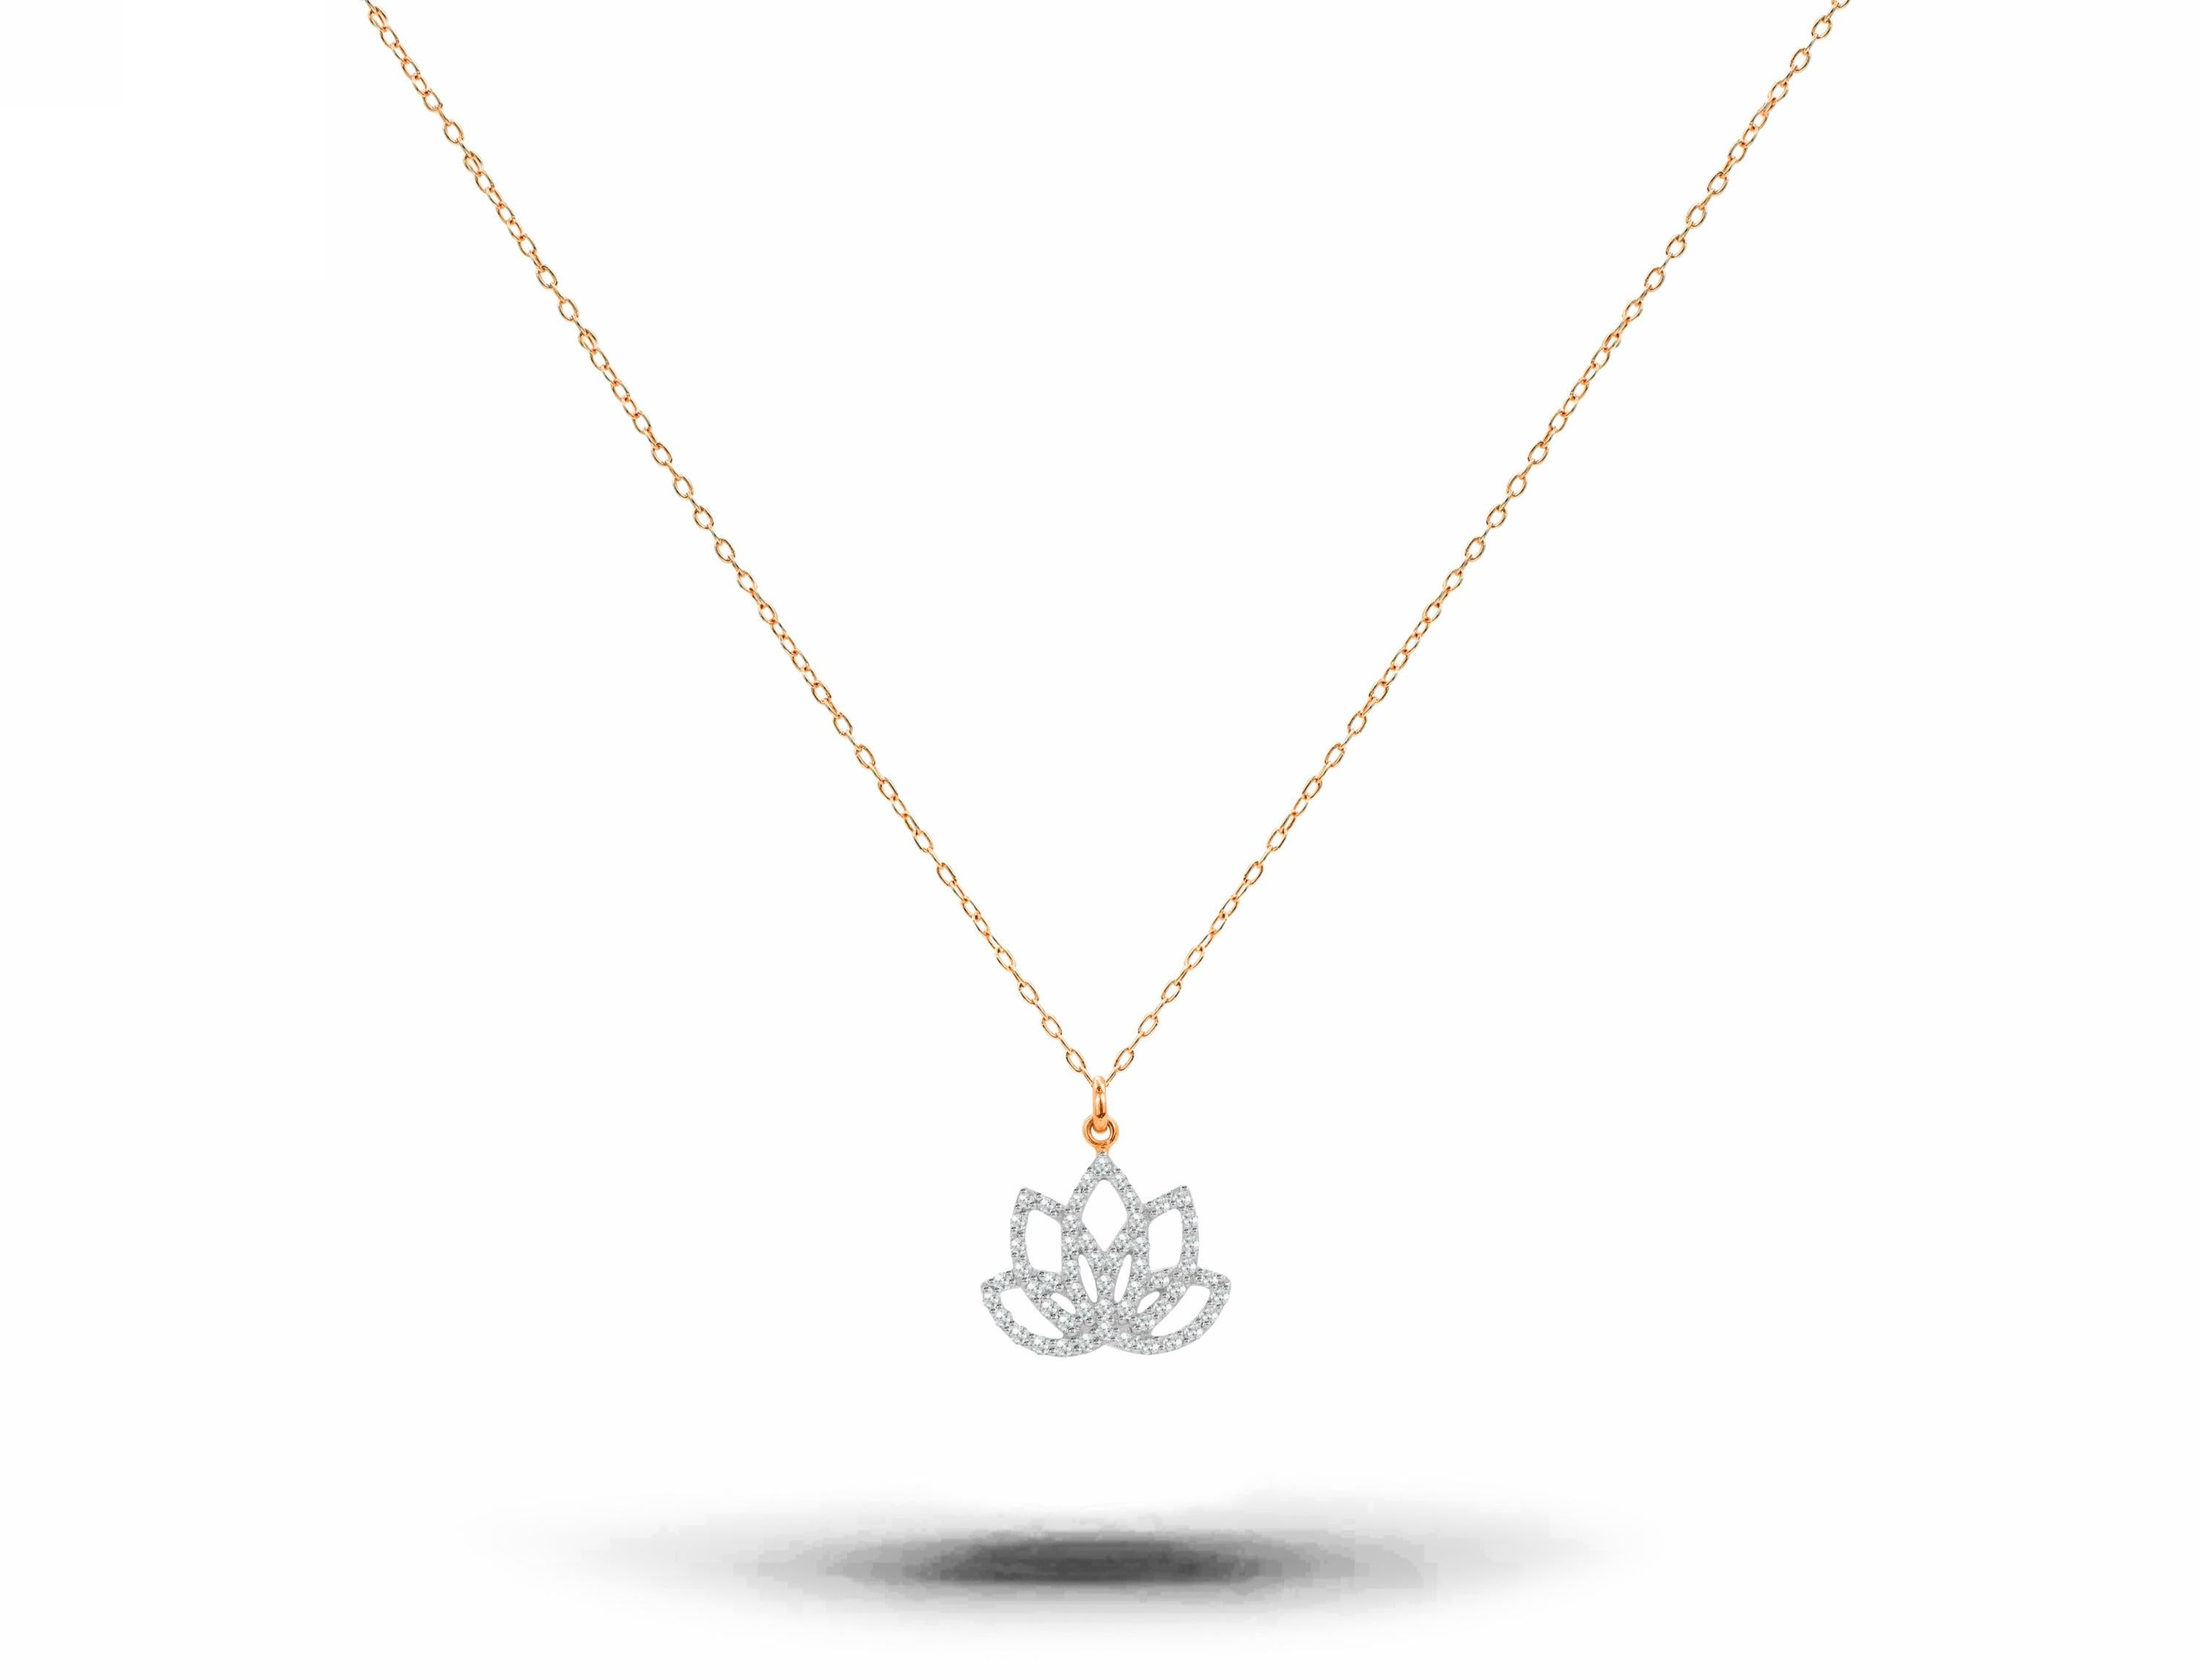 Diamond Lotus Necklace is made of 14k solid gold available in three colors of gold, White Gold / Rose Gold / Yellow Gold.

Natural genuine round cut diamond each diamond is hand selected by me to ensure quality and set by a master setter in our